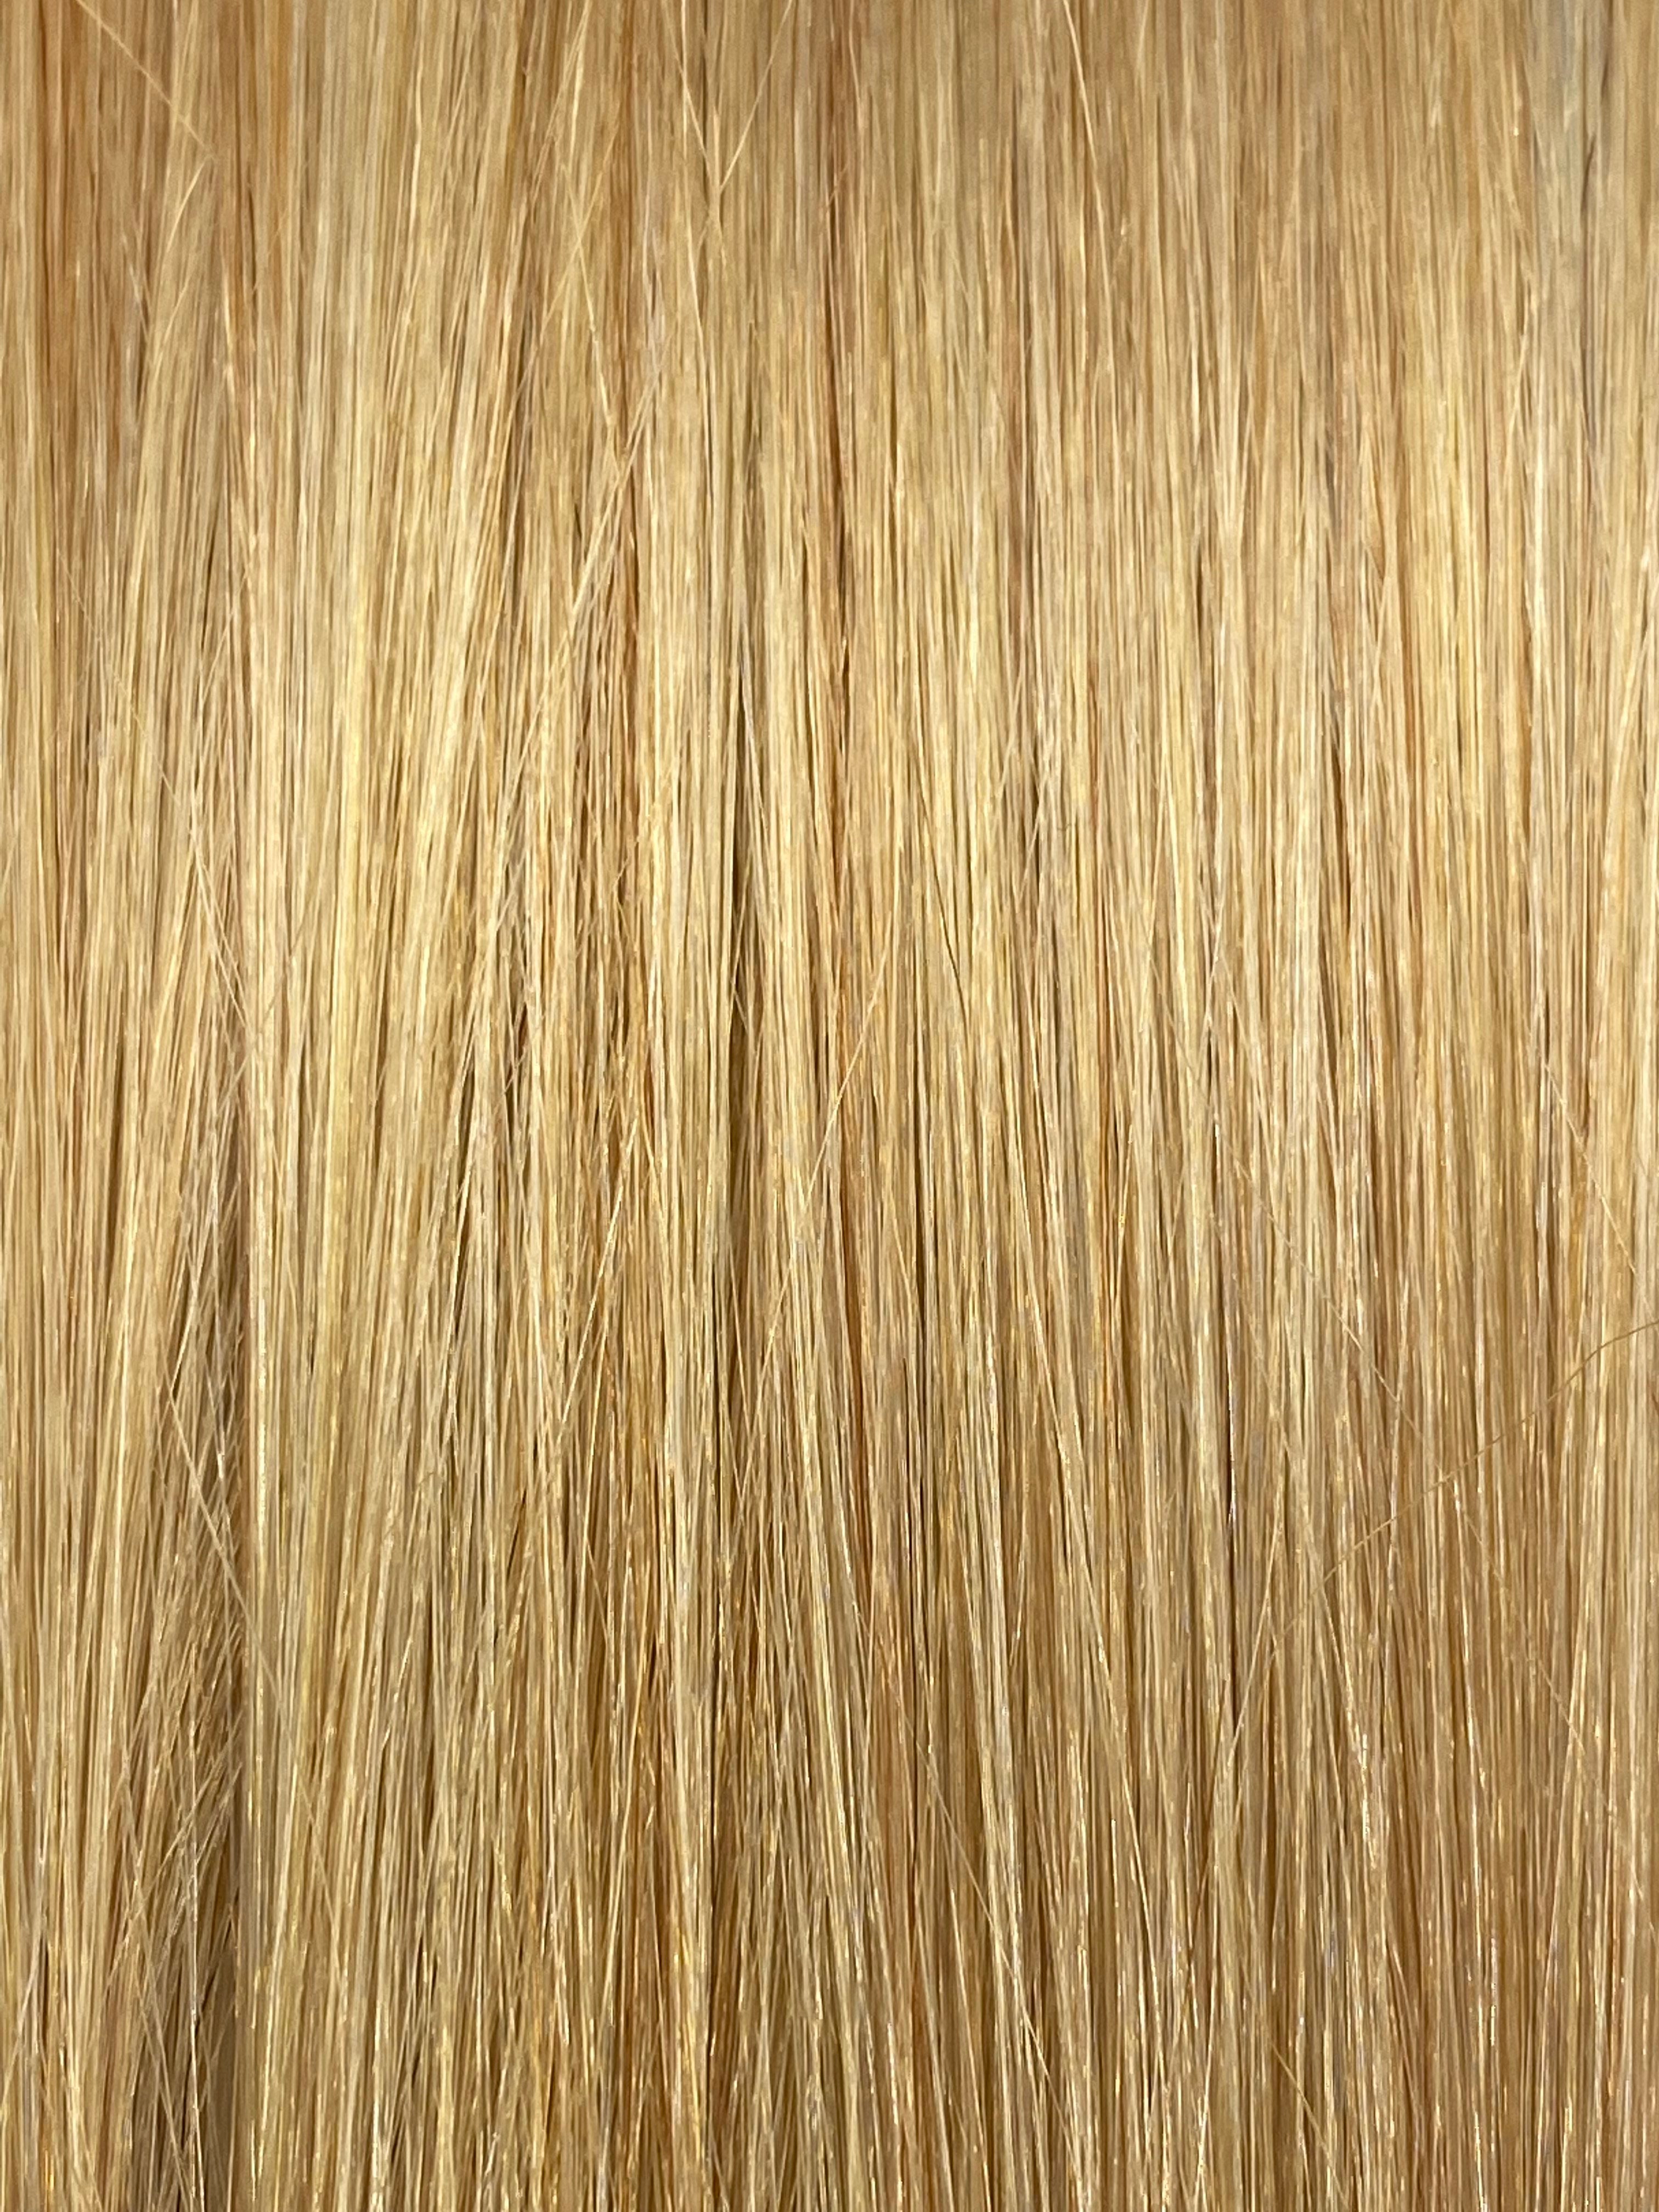 Tape #24 - 40cm/ 16 Inches - Ash Blonde - 16 Grams